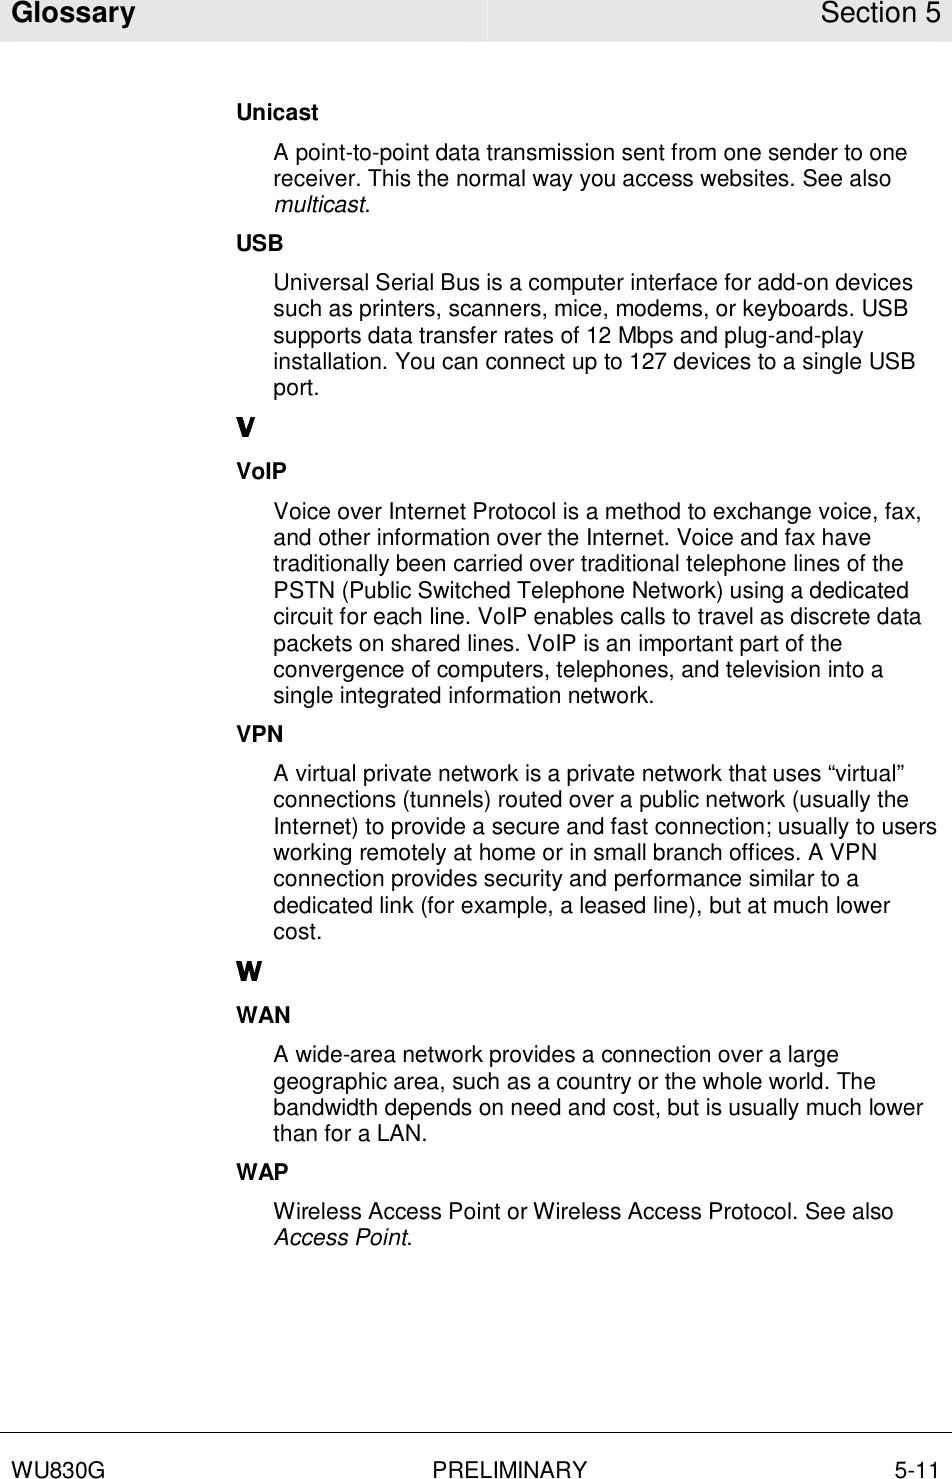 Glossary Section 5  WU830G PRELIMINARY 5-11  Unicast A point-to-point data transmission sent from one sender to one receiver. This the normal way you access websites. See also multicast. USB Universal Serial Bus is a computer interface for add-on devices such as printers, scanners, mice, modems, or keyboards. USB supports data transfer rates of 12 Mbps and plug-and-play installation. You can connect up to 127 devices to a single USB port. VoIP Voice over Internet Protocol is a method to exchange voice, fax, and other information over the Internet. Voice and fax have traditionally been carried over traditional telephone lines of the PSTN (Public Switched Telephone Network) using a dedicated circuit for each line. VoIP enables calls to travel as discrete data packets on shared lines. VoIP is an important part of the convergence of computers, telephones, and television into a single integrated information network. VPN A virtual private network is a private network that uses “virtual” connections (tunnels) routed over a public network (usually the Internet) to provide a secure and fast connection; usually to users working remotely at home or in small branch offices. A VPN connection provides security and performance similar to a dedicated link (for example, a leased line), but at much lower cost. WAN A wide-area network provides a connection over a large geographic area, such as a country or the whole world. The bandwidth depends on need and cost, but is usually much lower than for a LAN. WAP Wireless Access Point or Wireless Access Protocol. See also Access Point. 